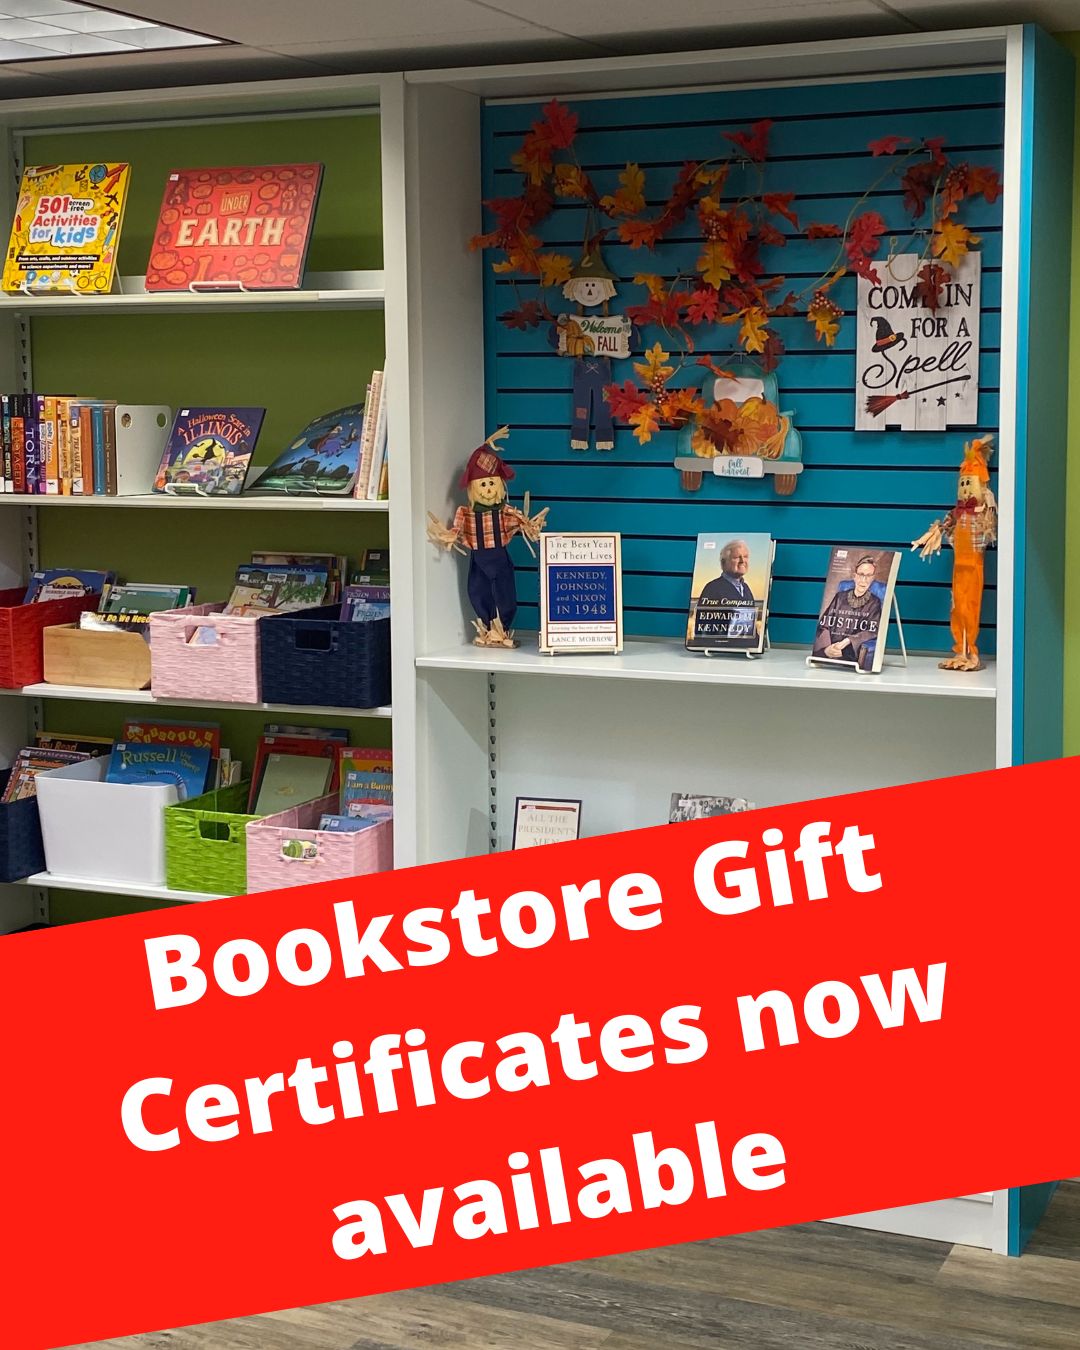 Bookstore Gift Certificates now available